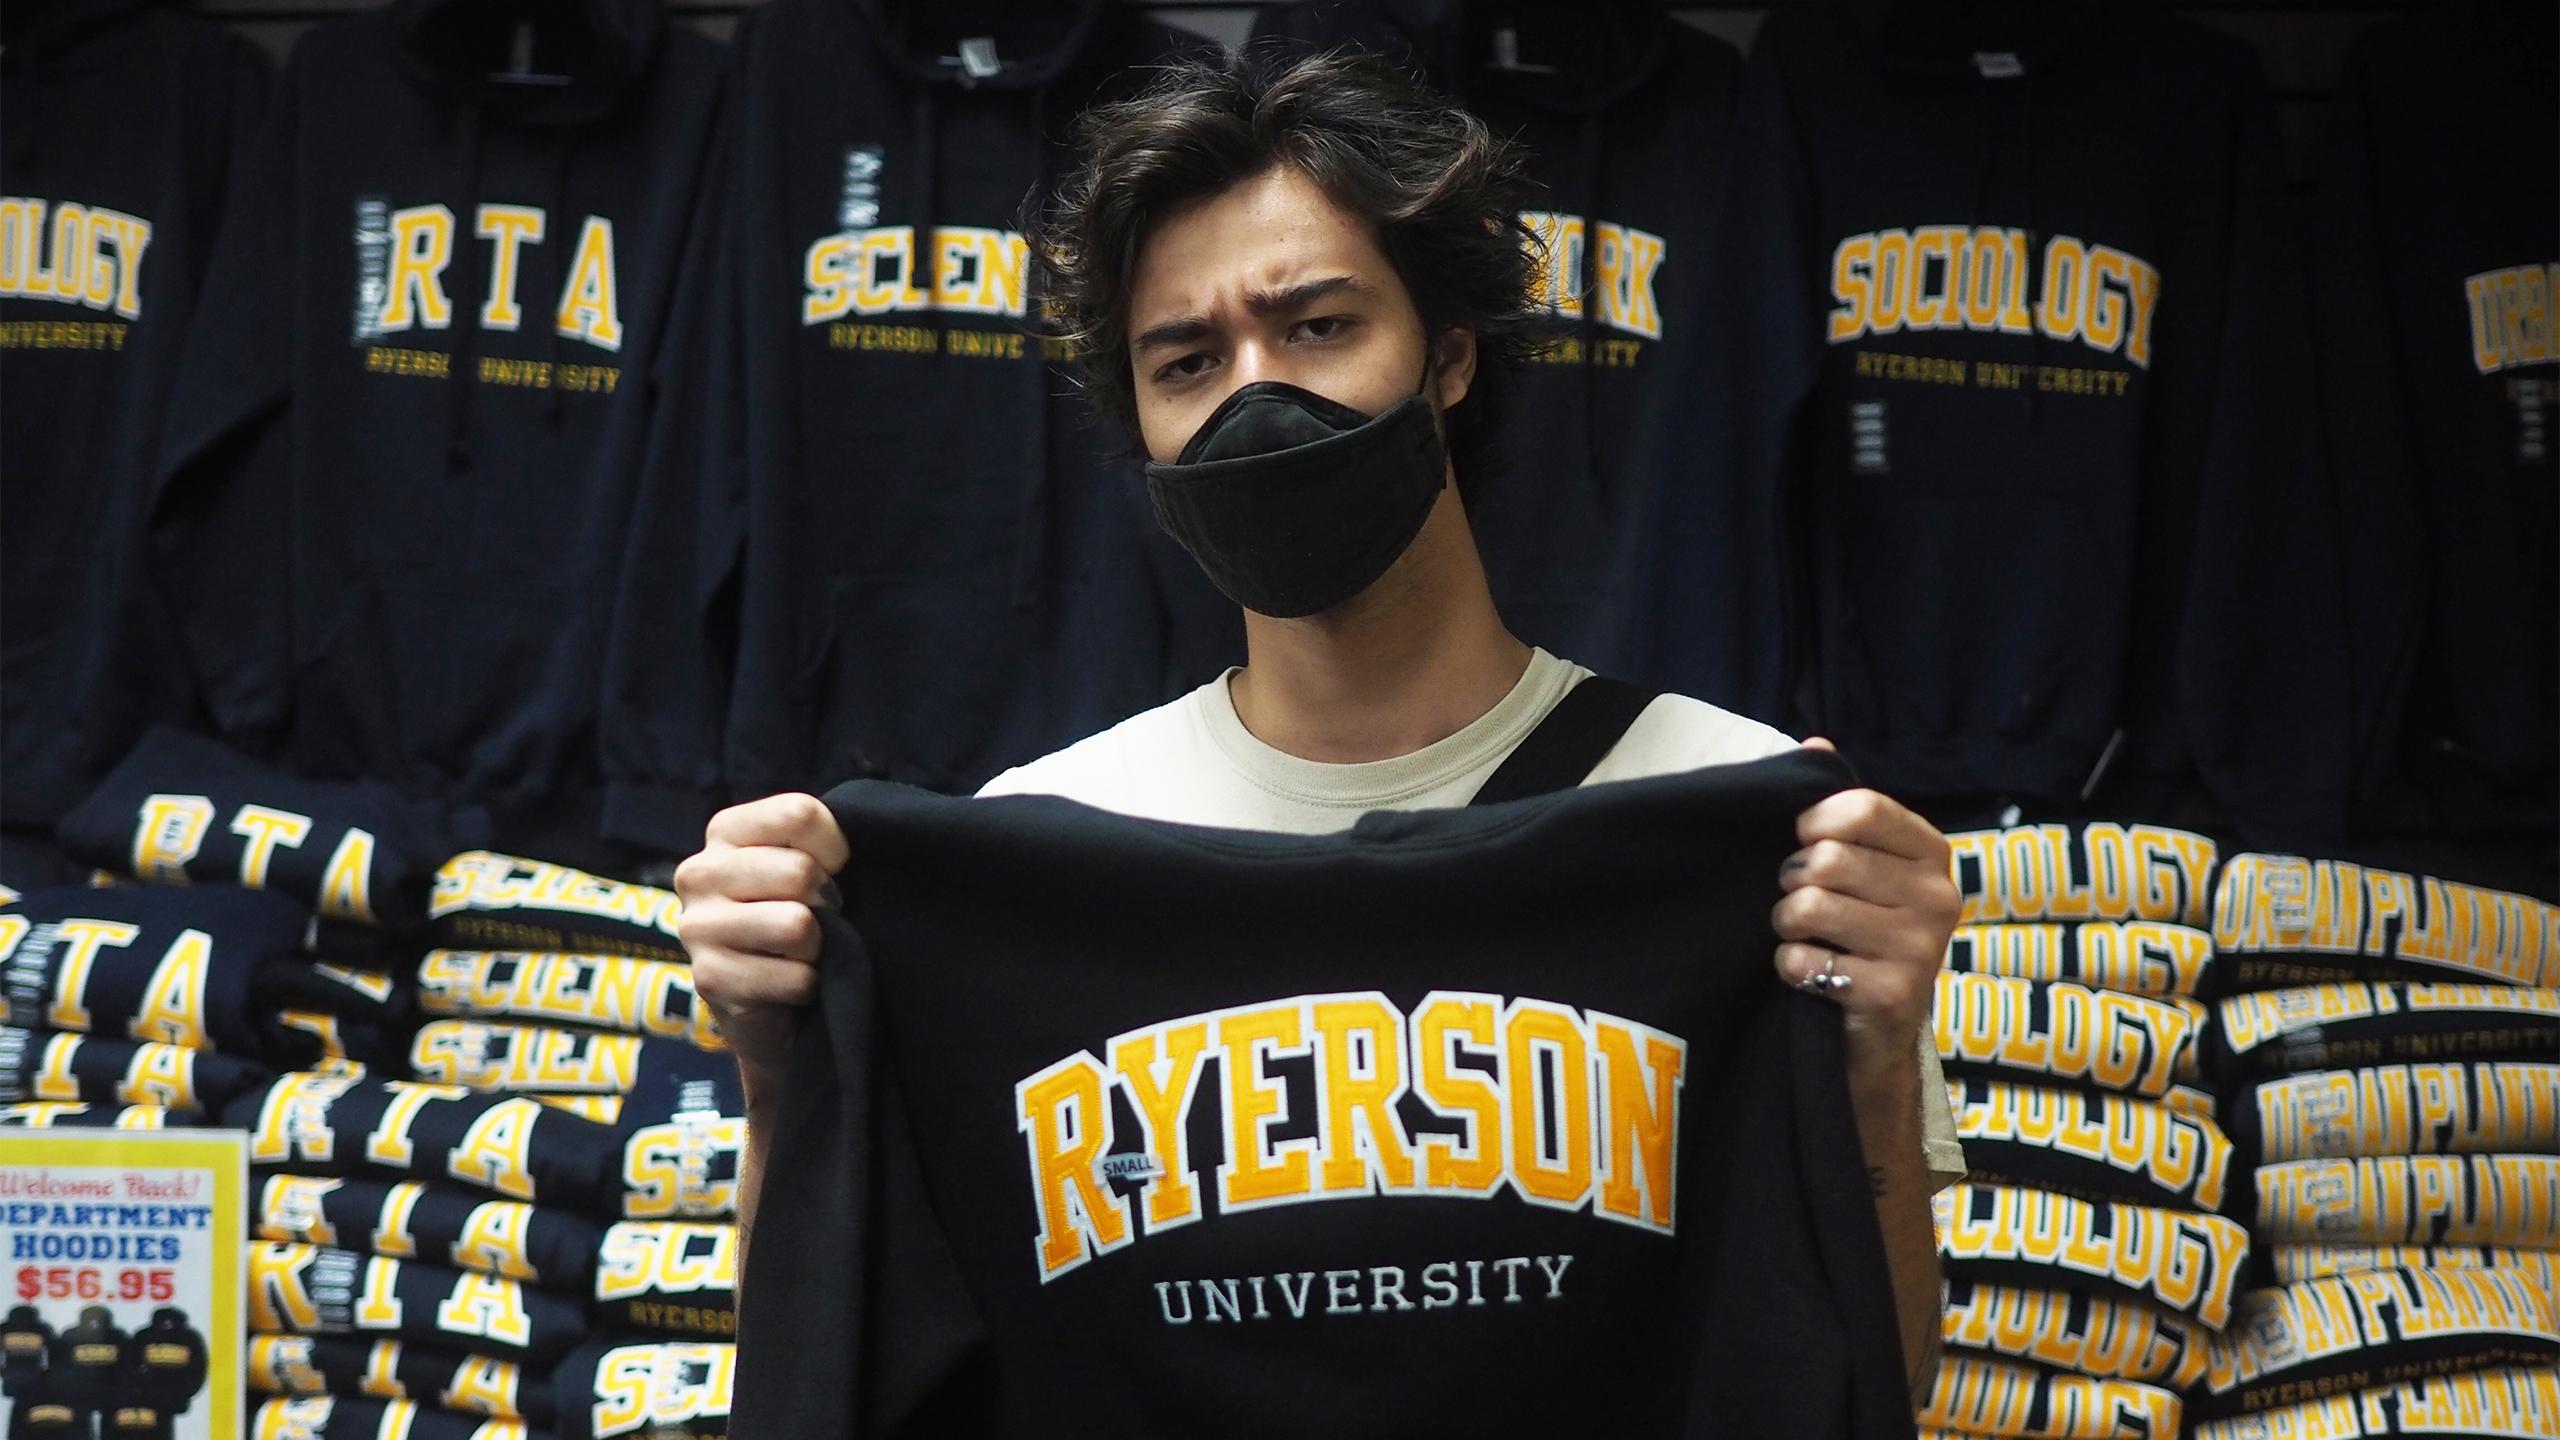 A man scowling holding up a Ryerson hoodie in the campus store